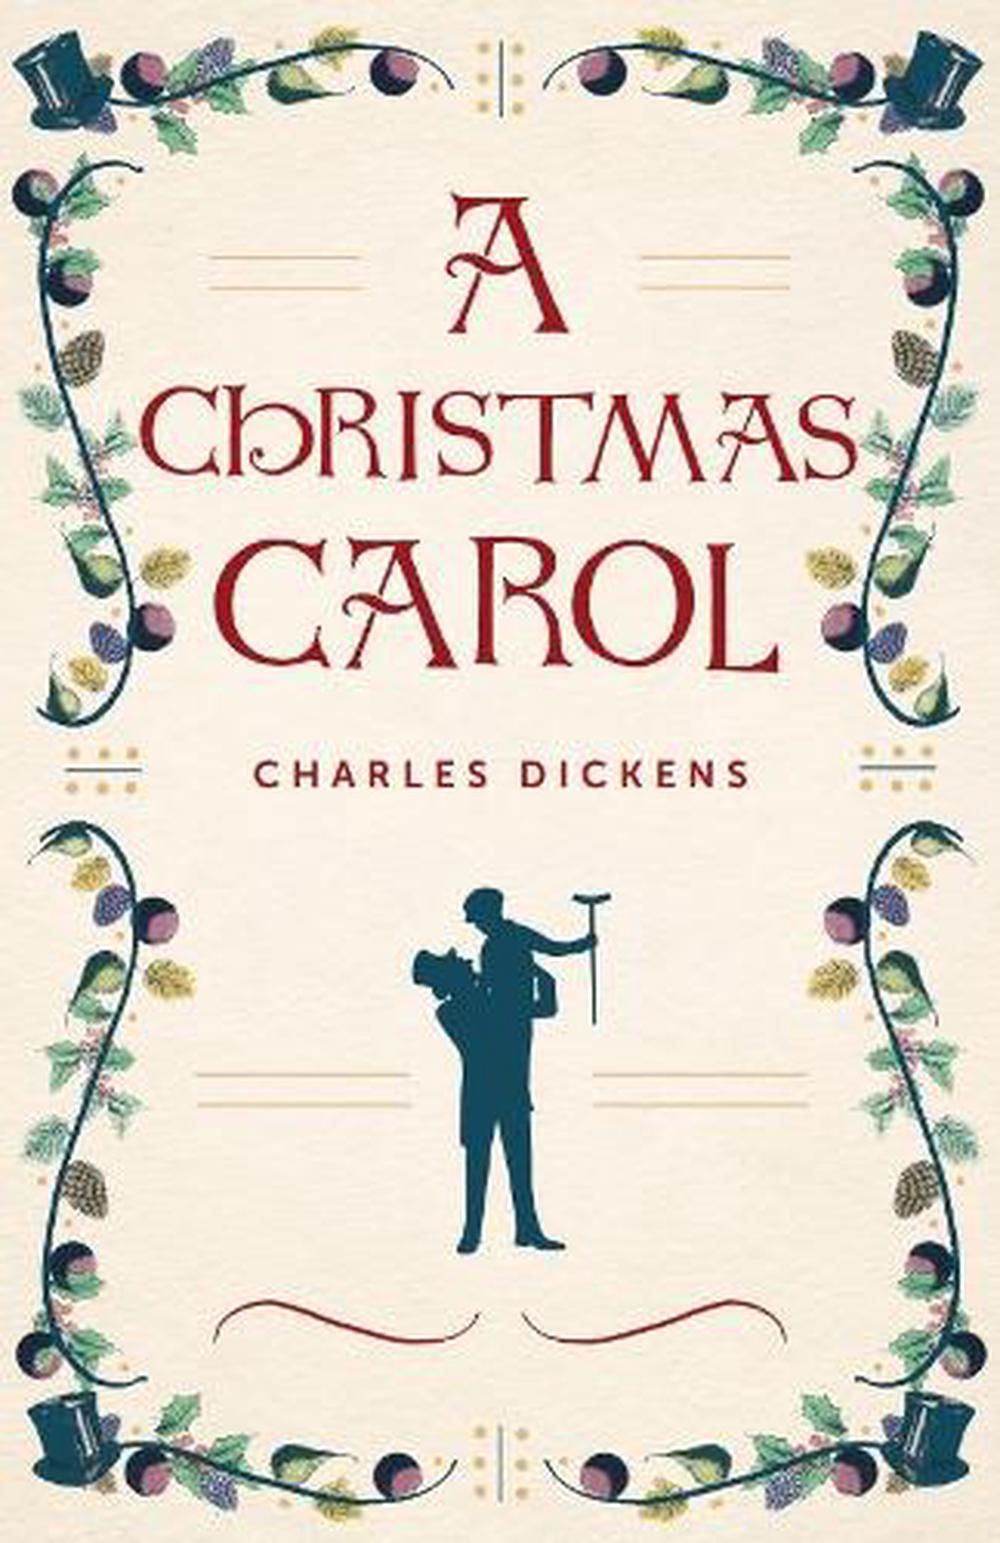 A Christmas Carol by Charles Dickens (English) Paperback Book Free Shipping! 9781612618395 | eBay